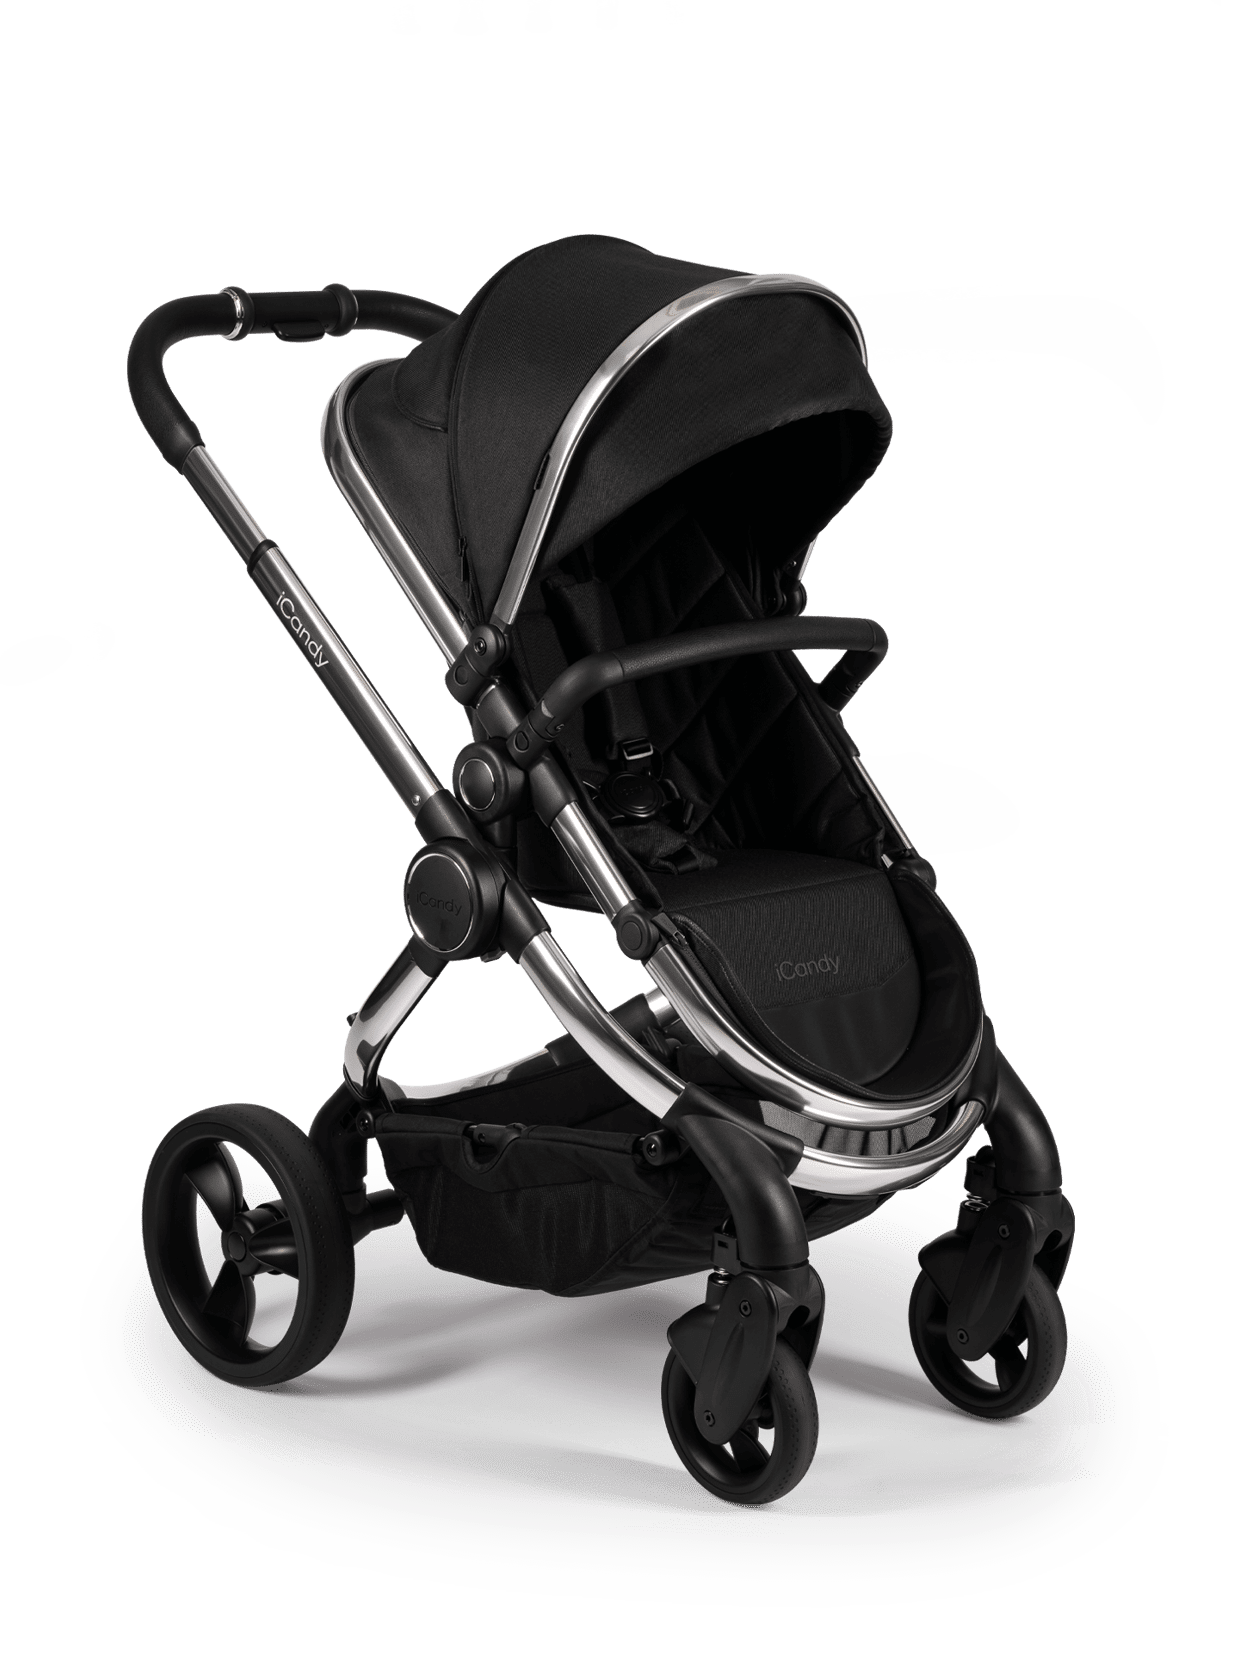 Peach Pushchair and Carrycot With Bag